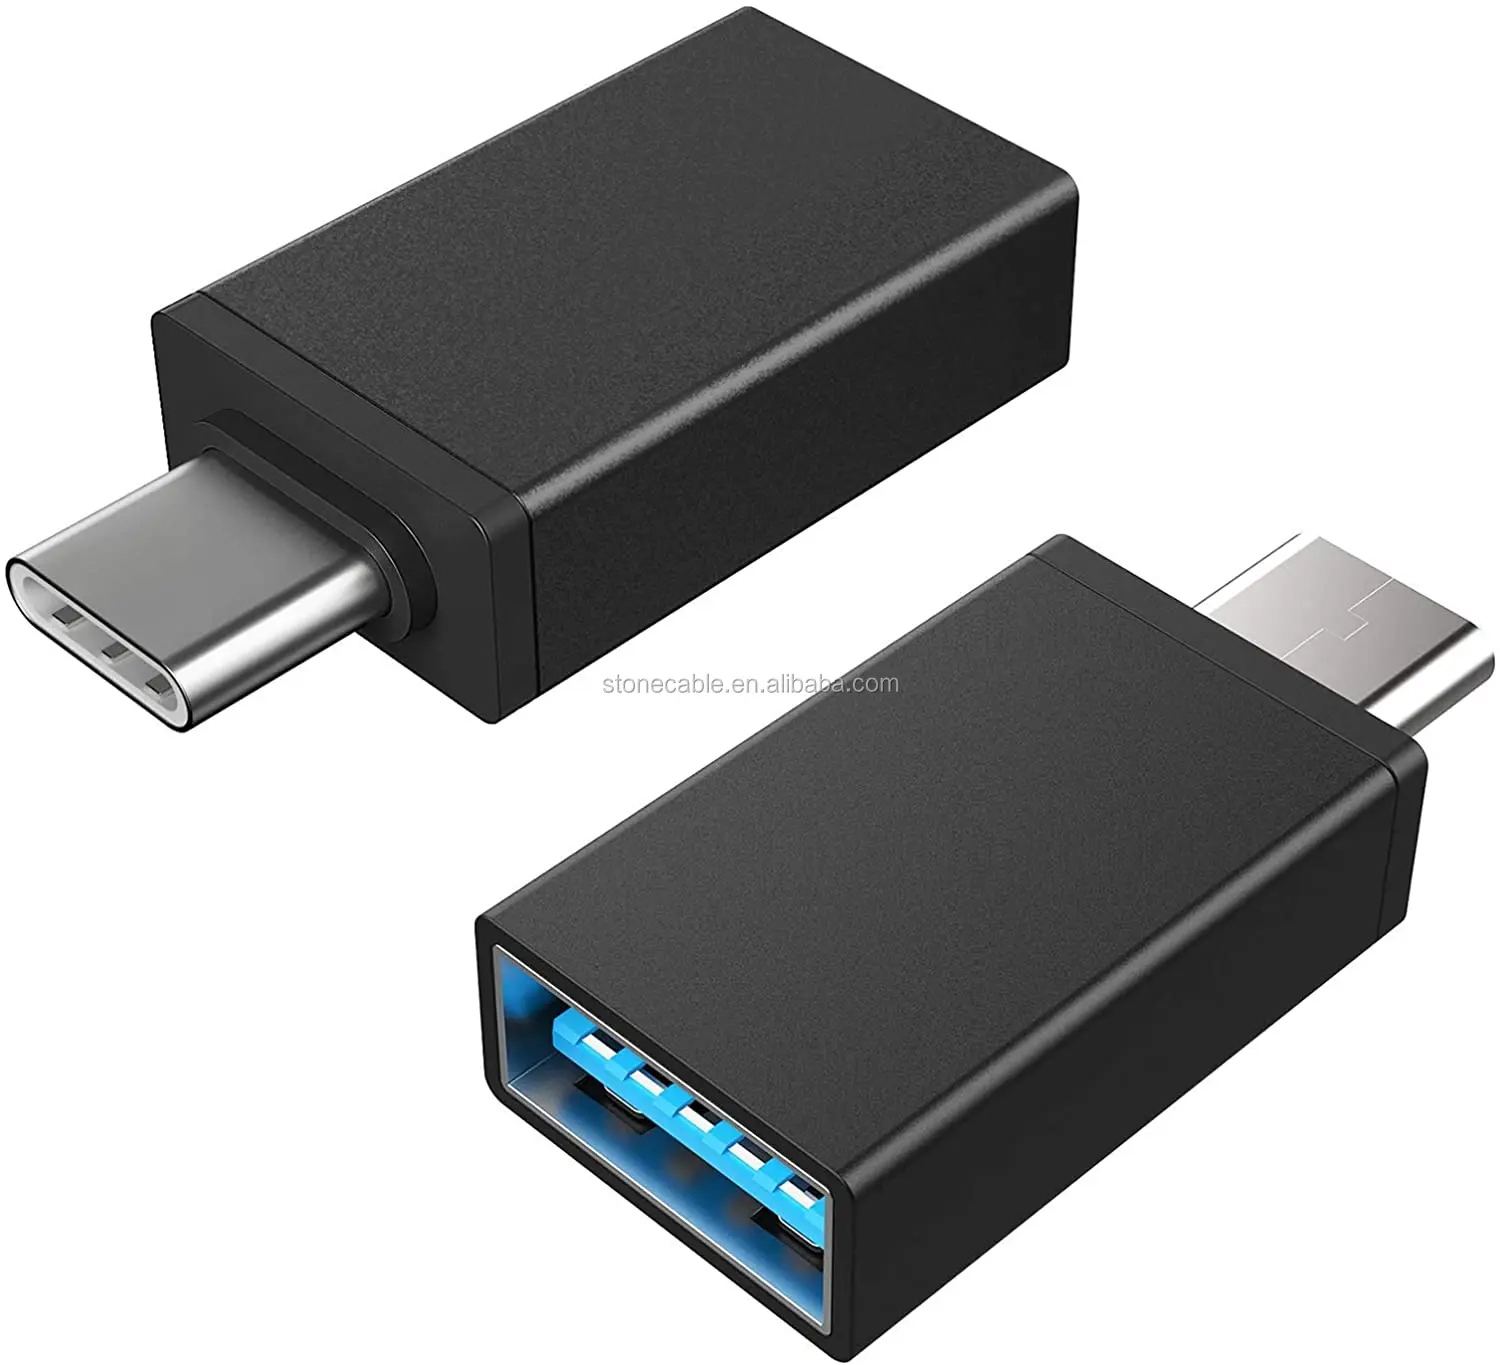 Usb 3.1 Usb-c Type C Otg Adapter Male To Usb3.0 A Female Adapter - Buy ...